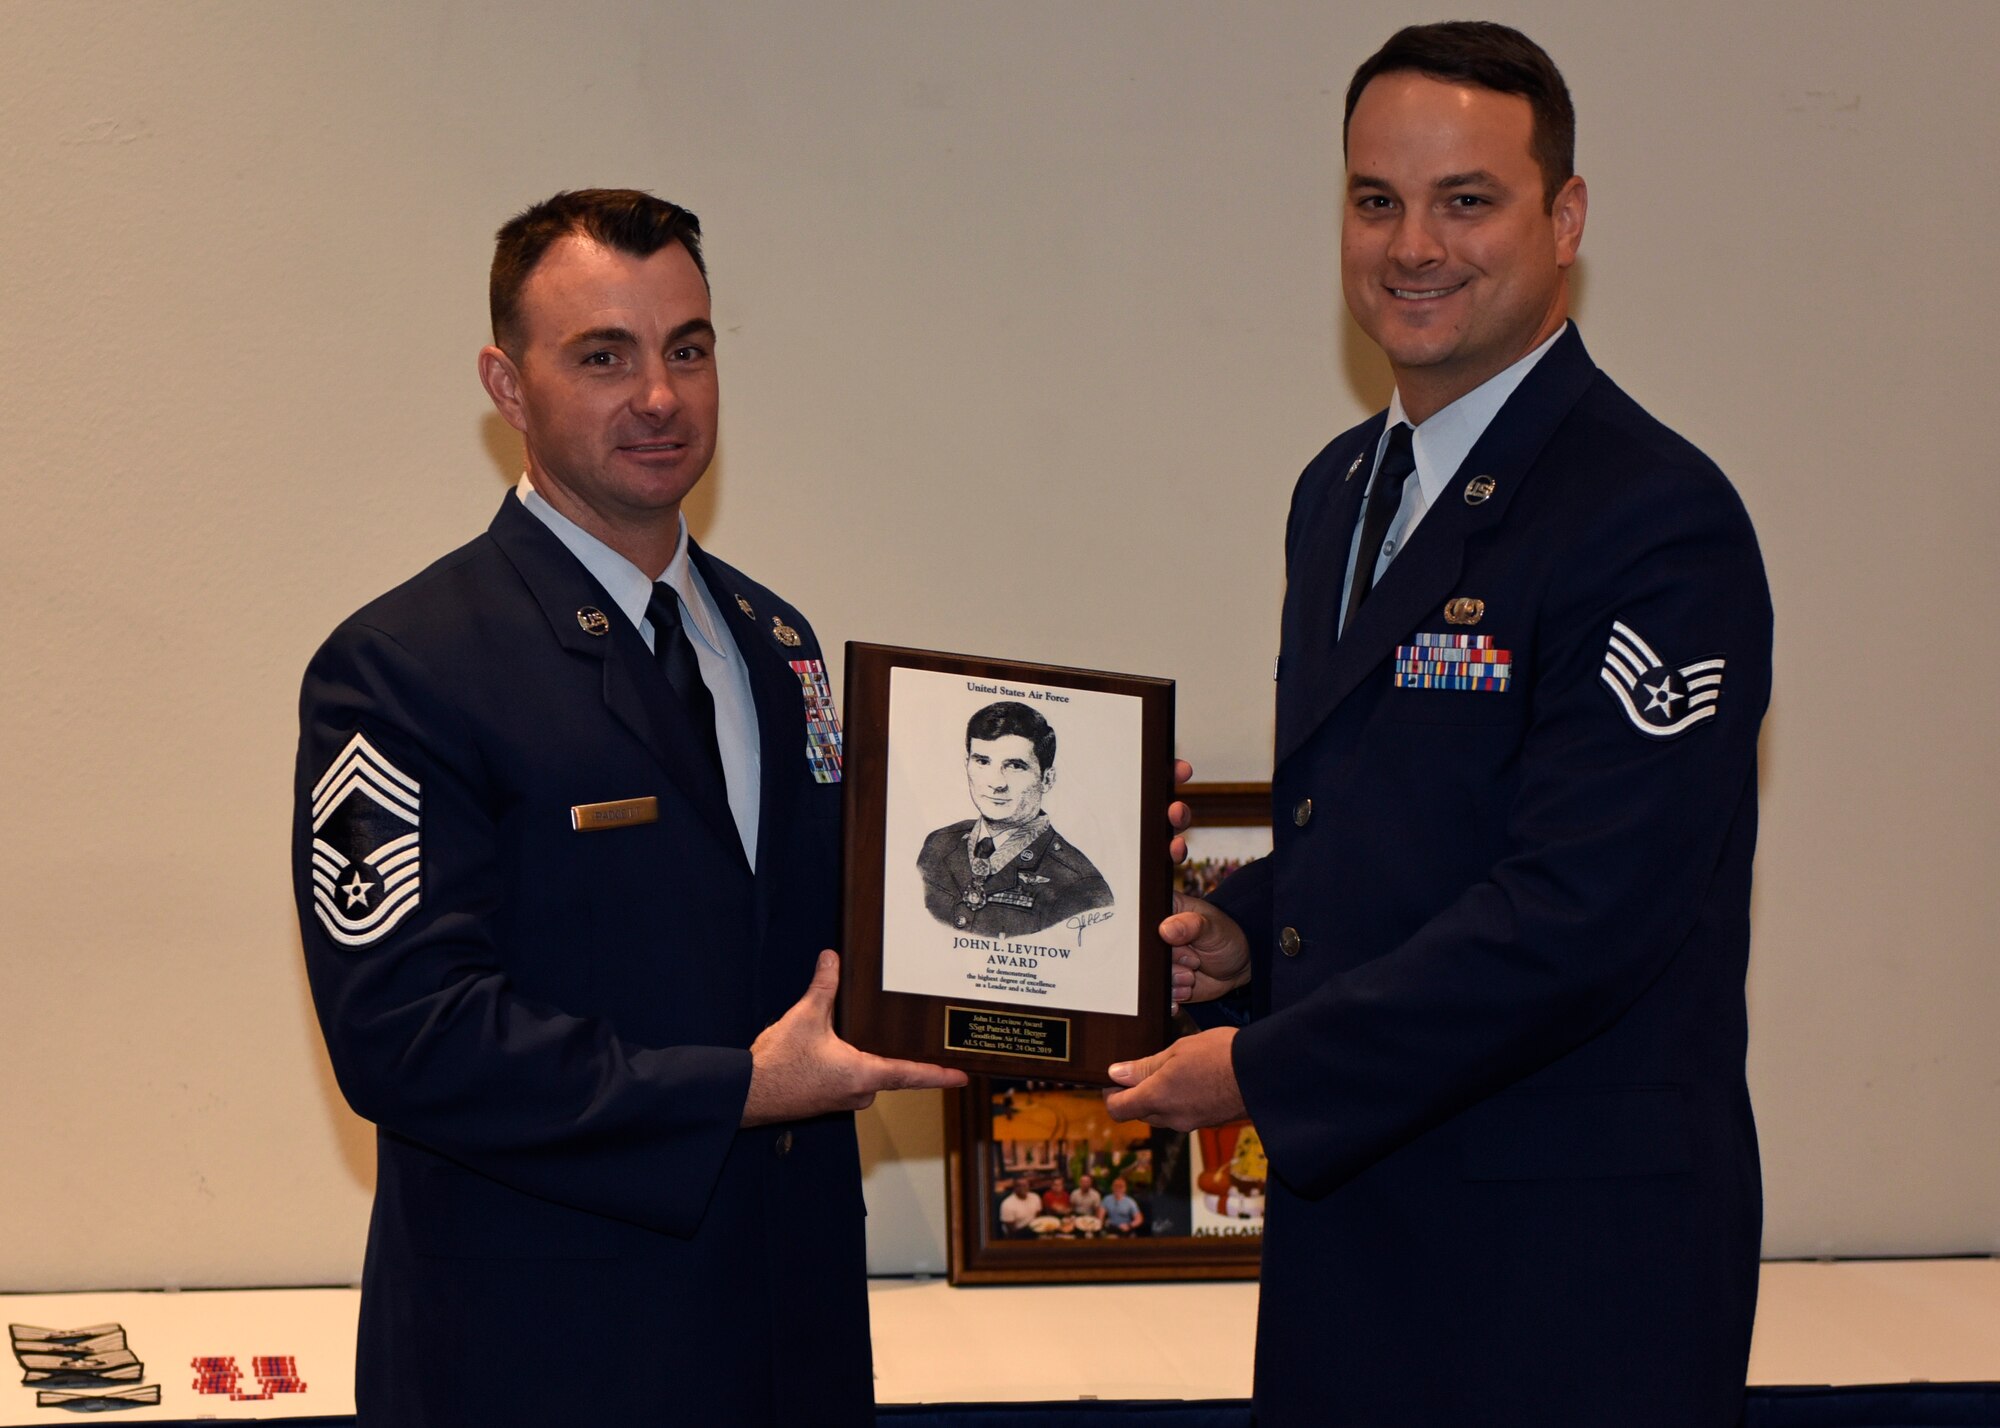 U.S. Air Force Chief Master Sgt. Michael Padgett, 17th Mission Support Group superintendent, presents the John L. Levitow Award to Staff Sgt. Patrick Berger, 17th Contracting Squadron contracting specialist, at the event center on Goodfellow Air Force Base, Texas, Oct. 24, 2019. The John L. Levitow Award is the highest award possible in professional military education, it is based upon all performance tasks, peer stratifications, and the capstone exercise. (U.S. Air Force photo by Airman 1st Class Ethan Sherwood/Released)